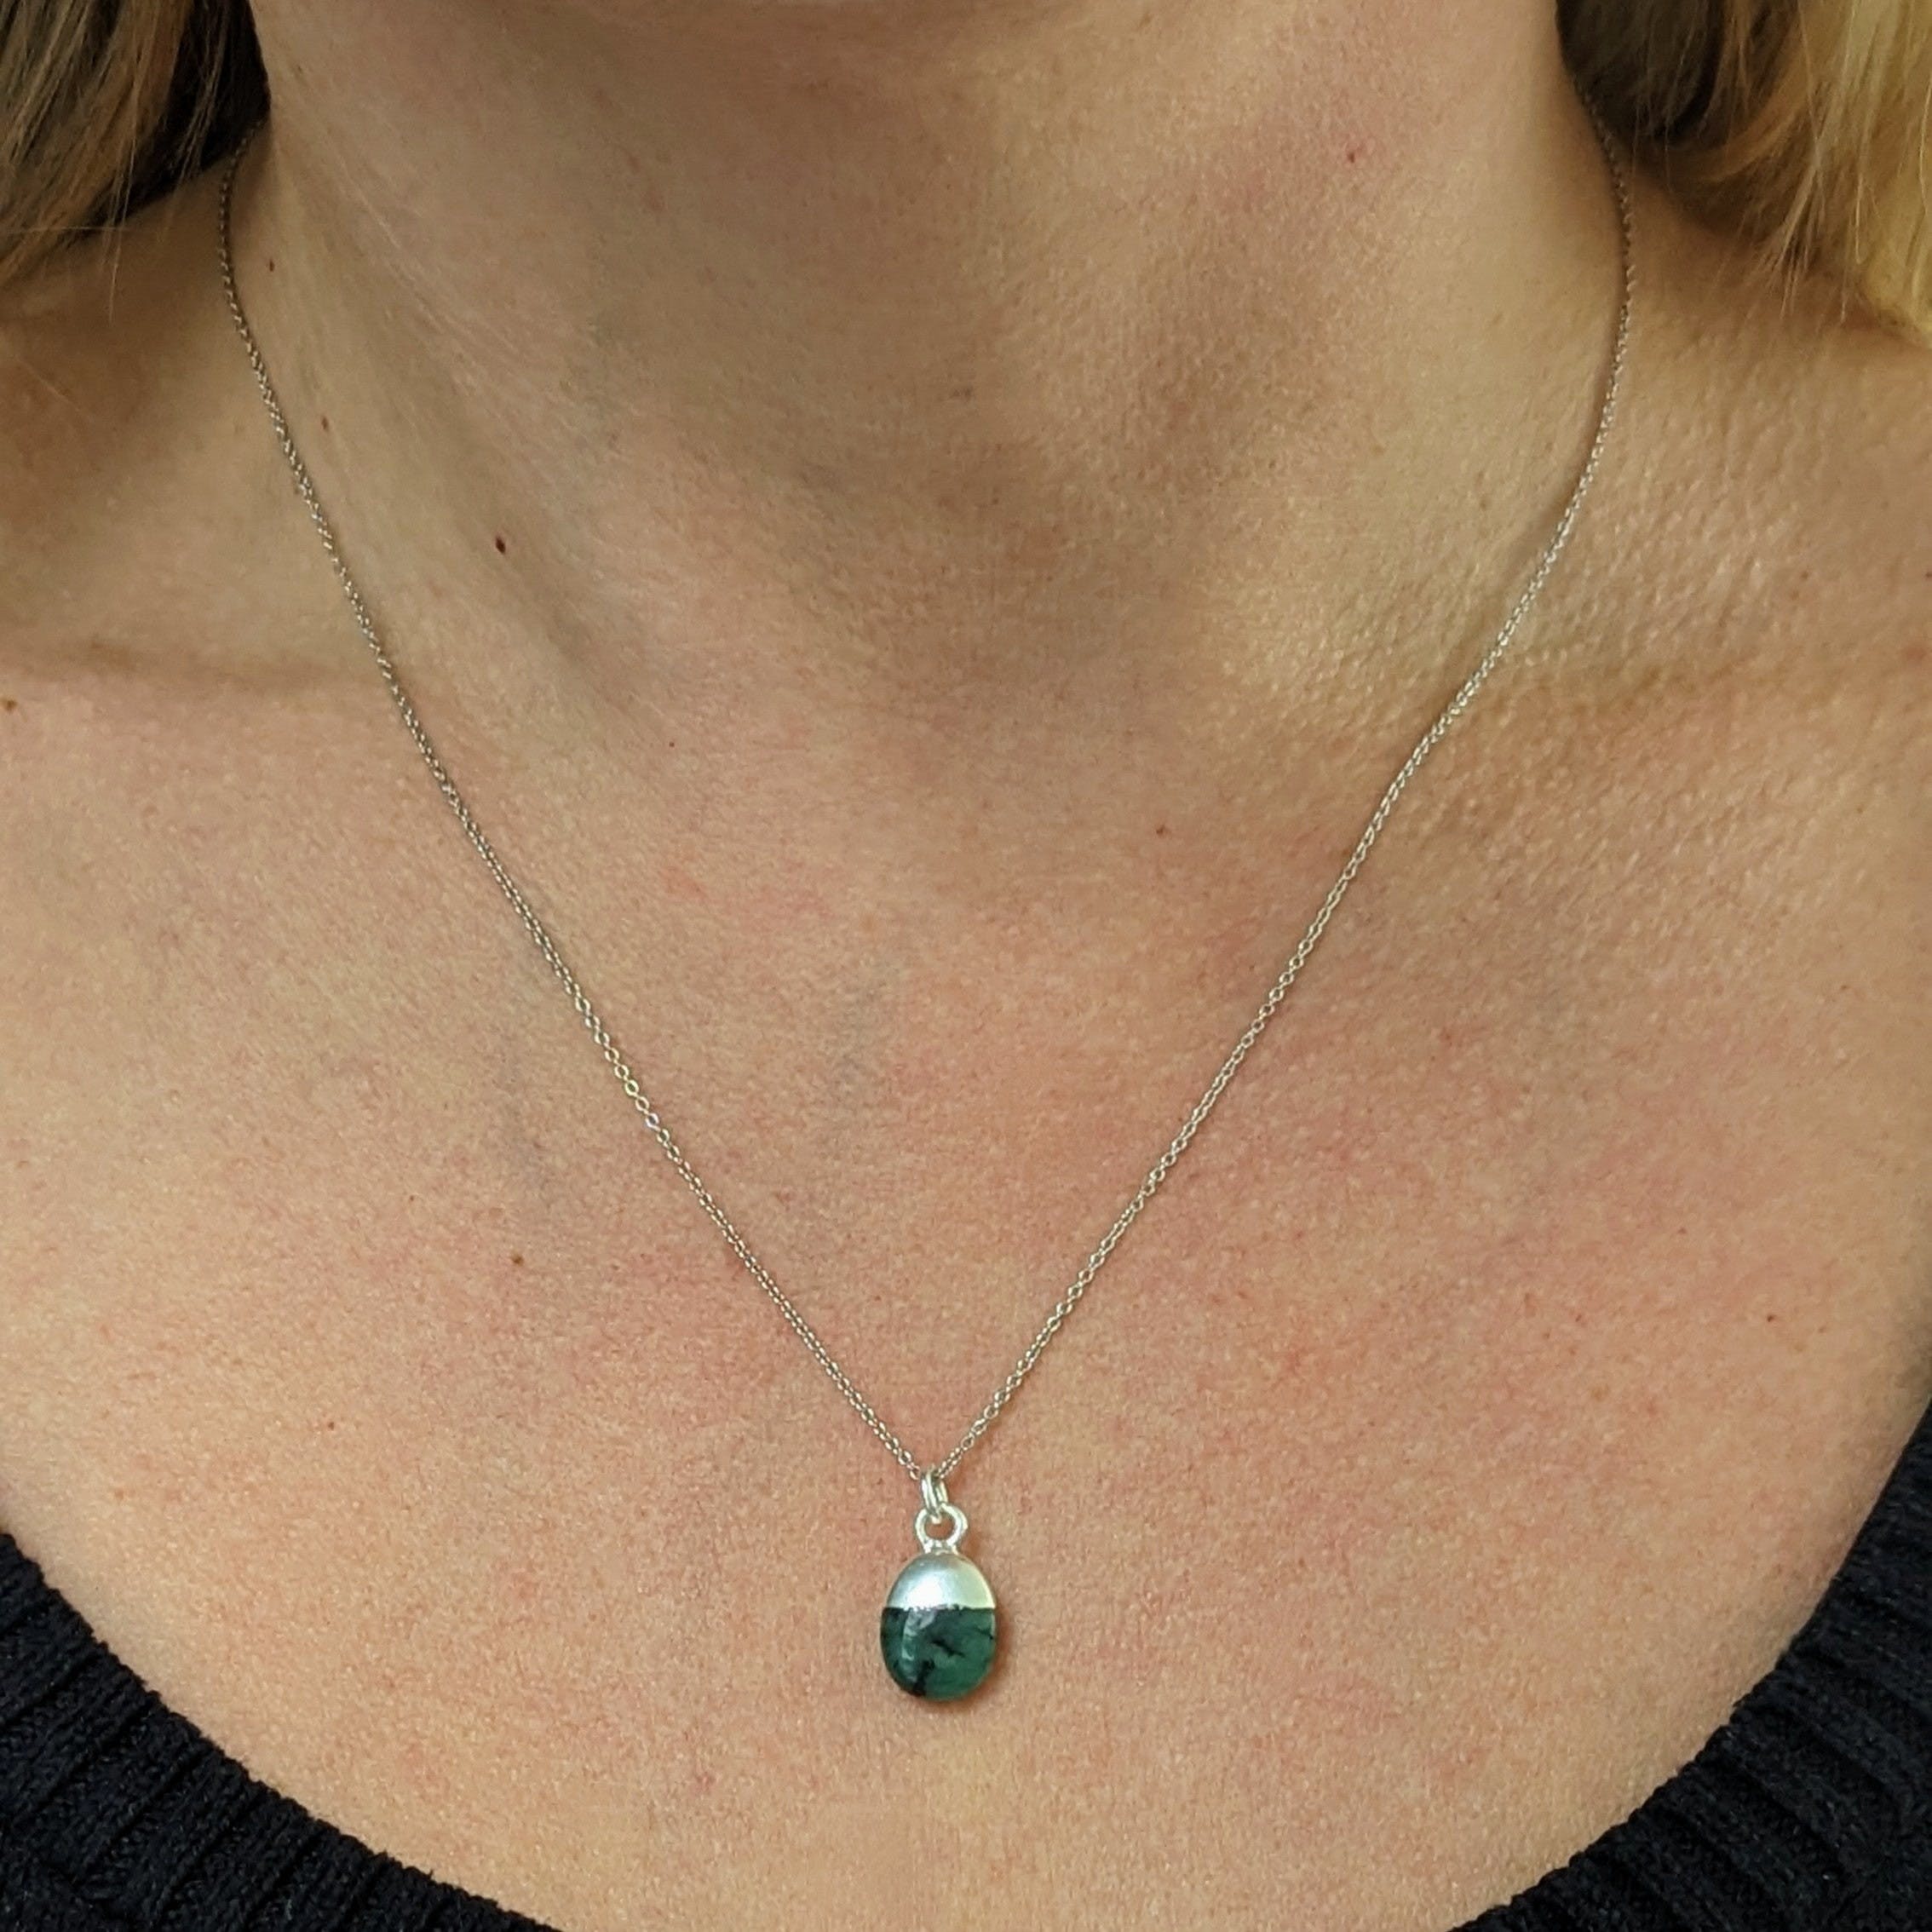 Smooth Tumbled Emerald Pendant Necklace